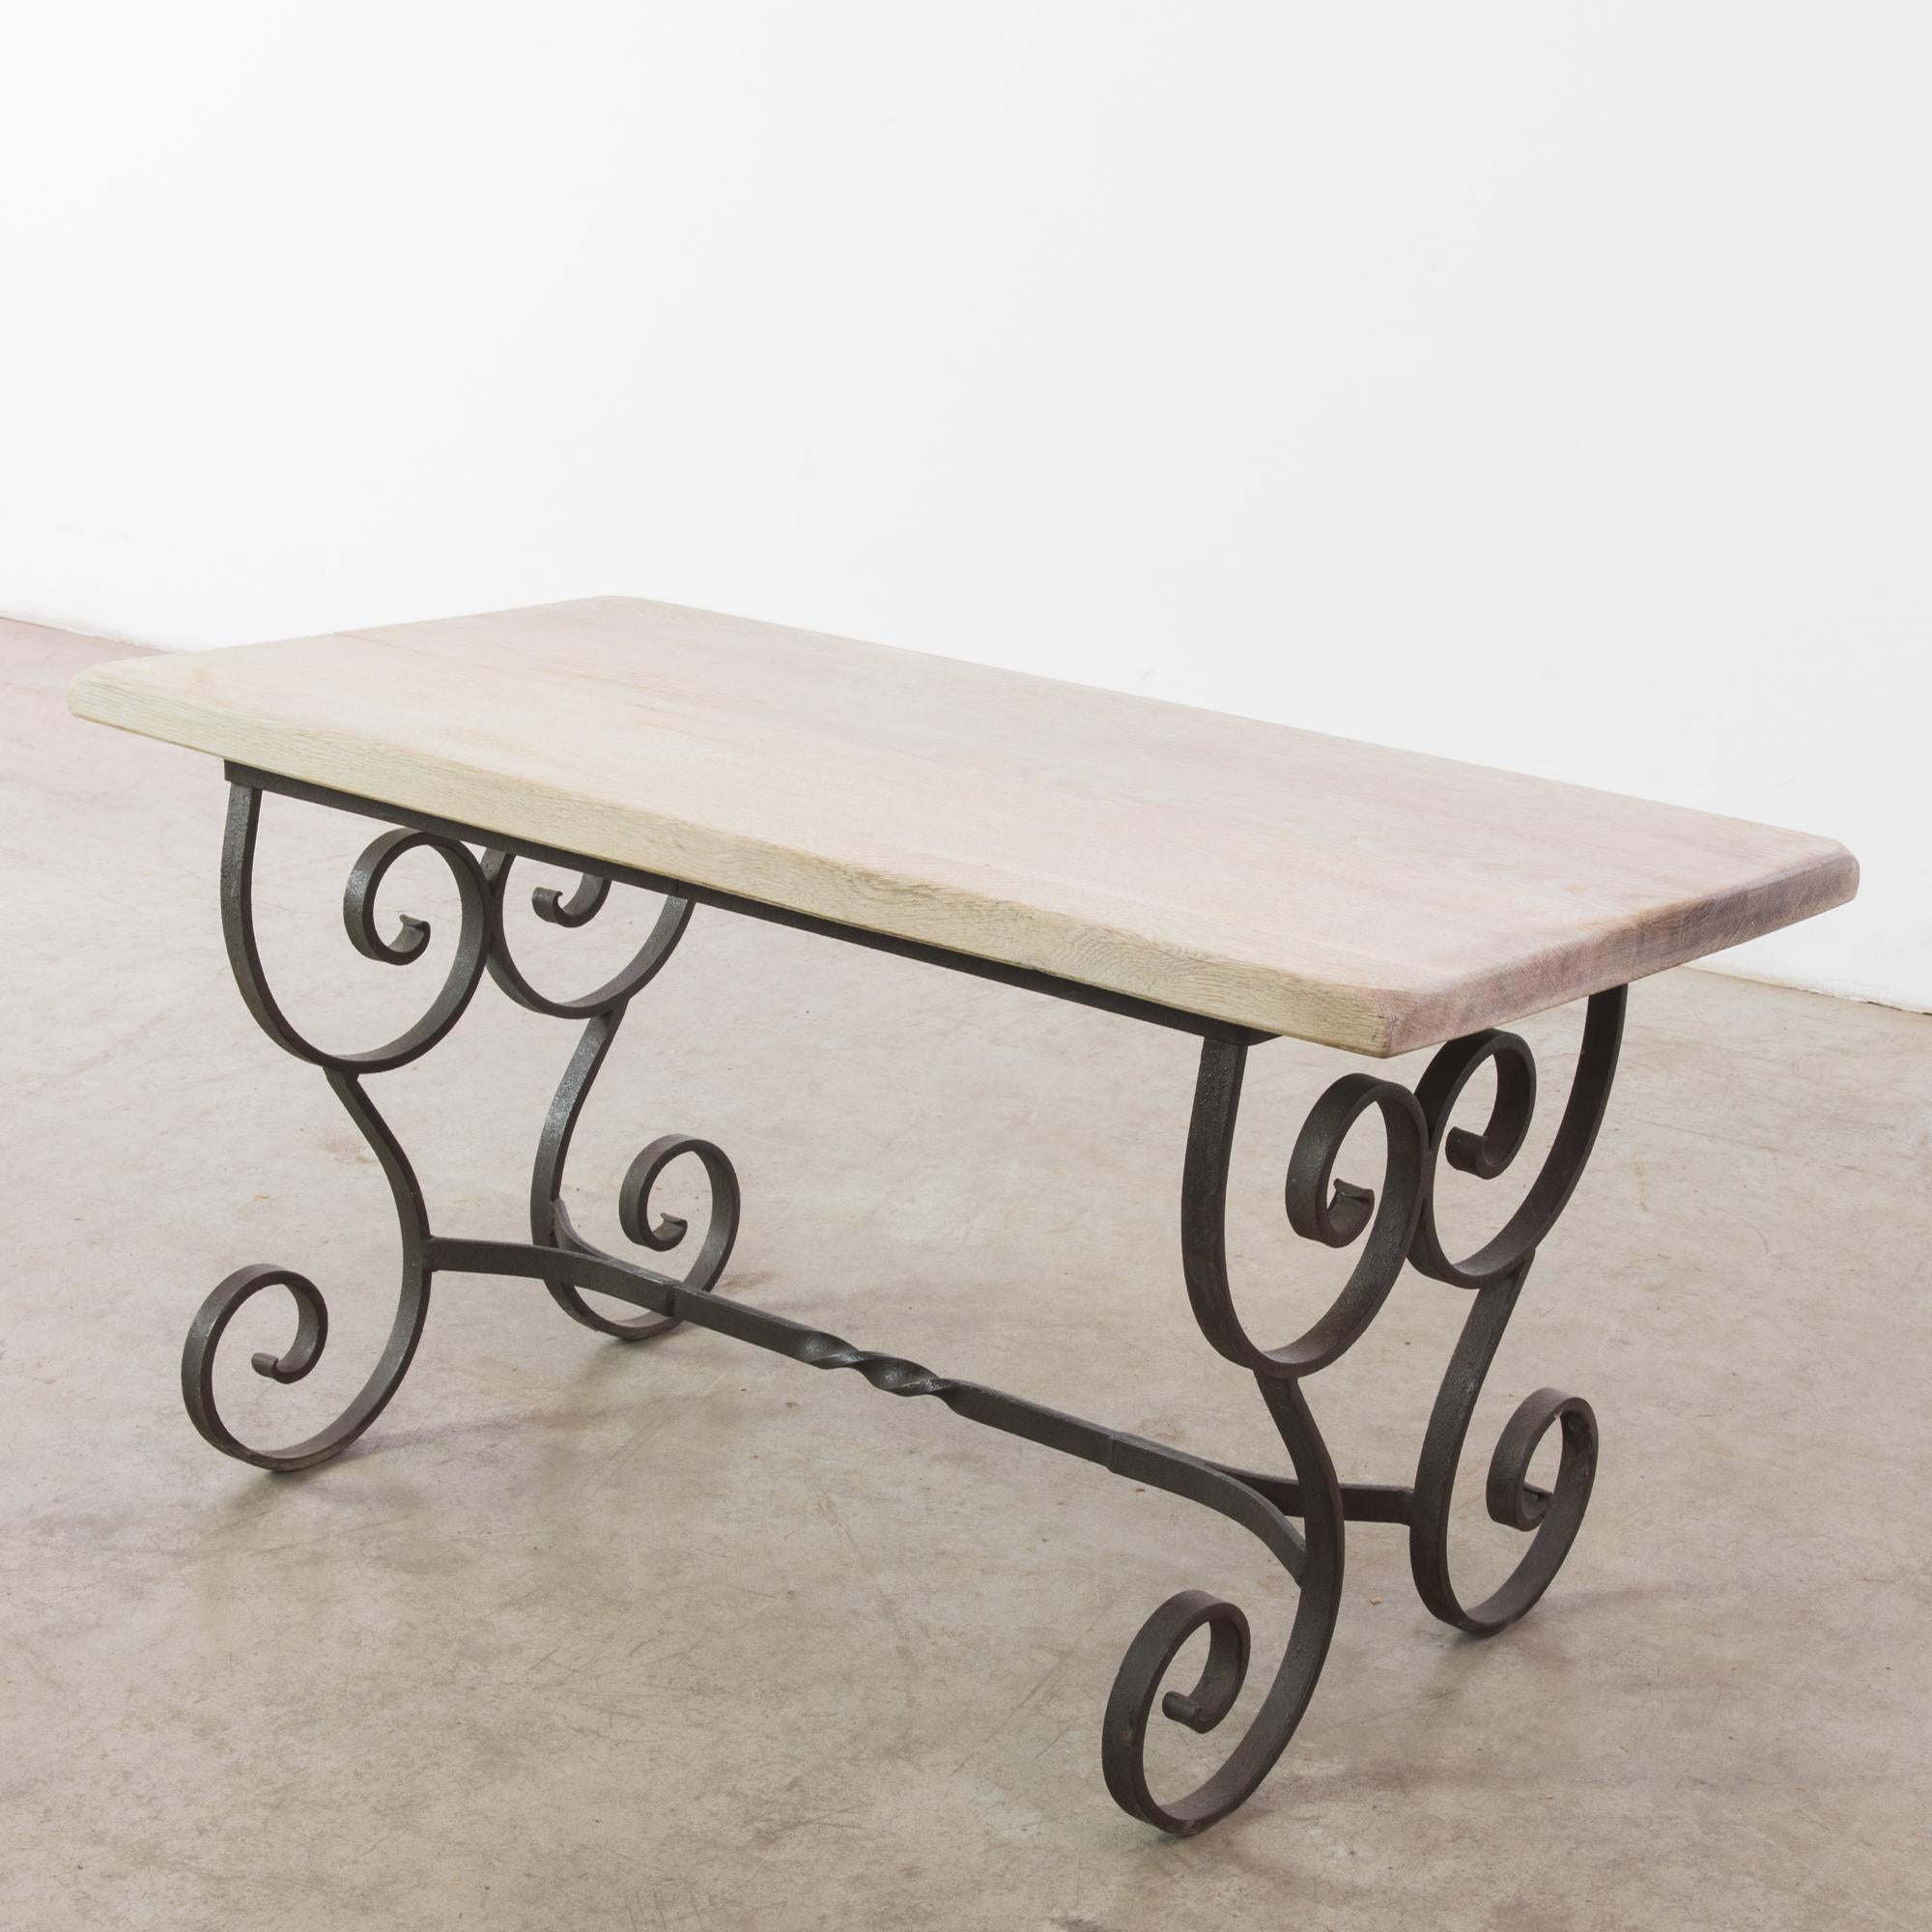 Mid-20th Century 1950s Belgian Wrought Iron Coffee Table with Wooden Top